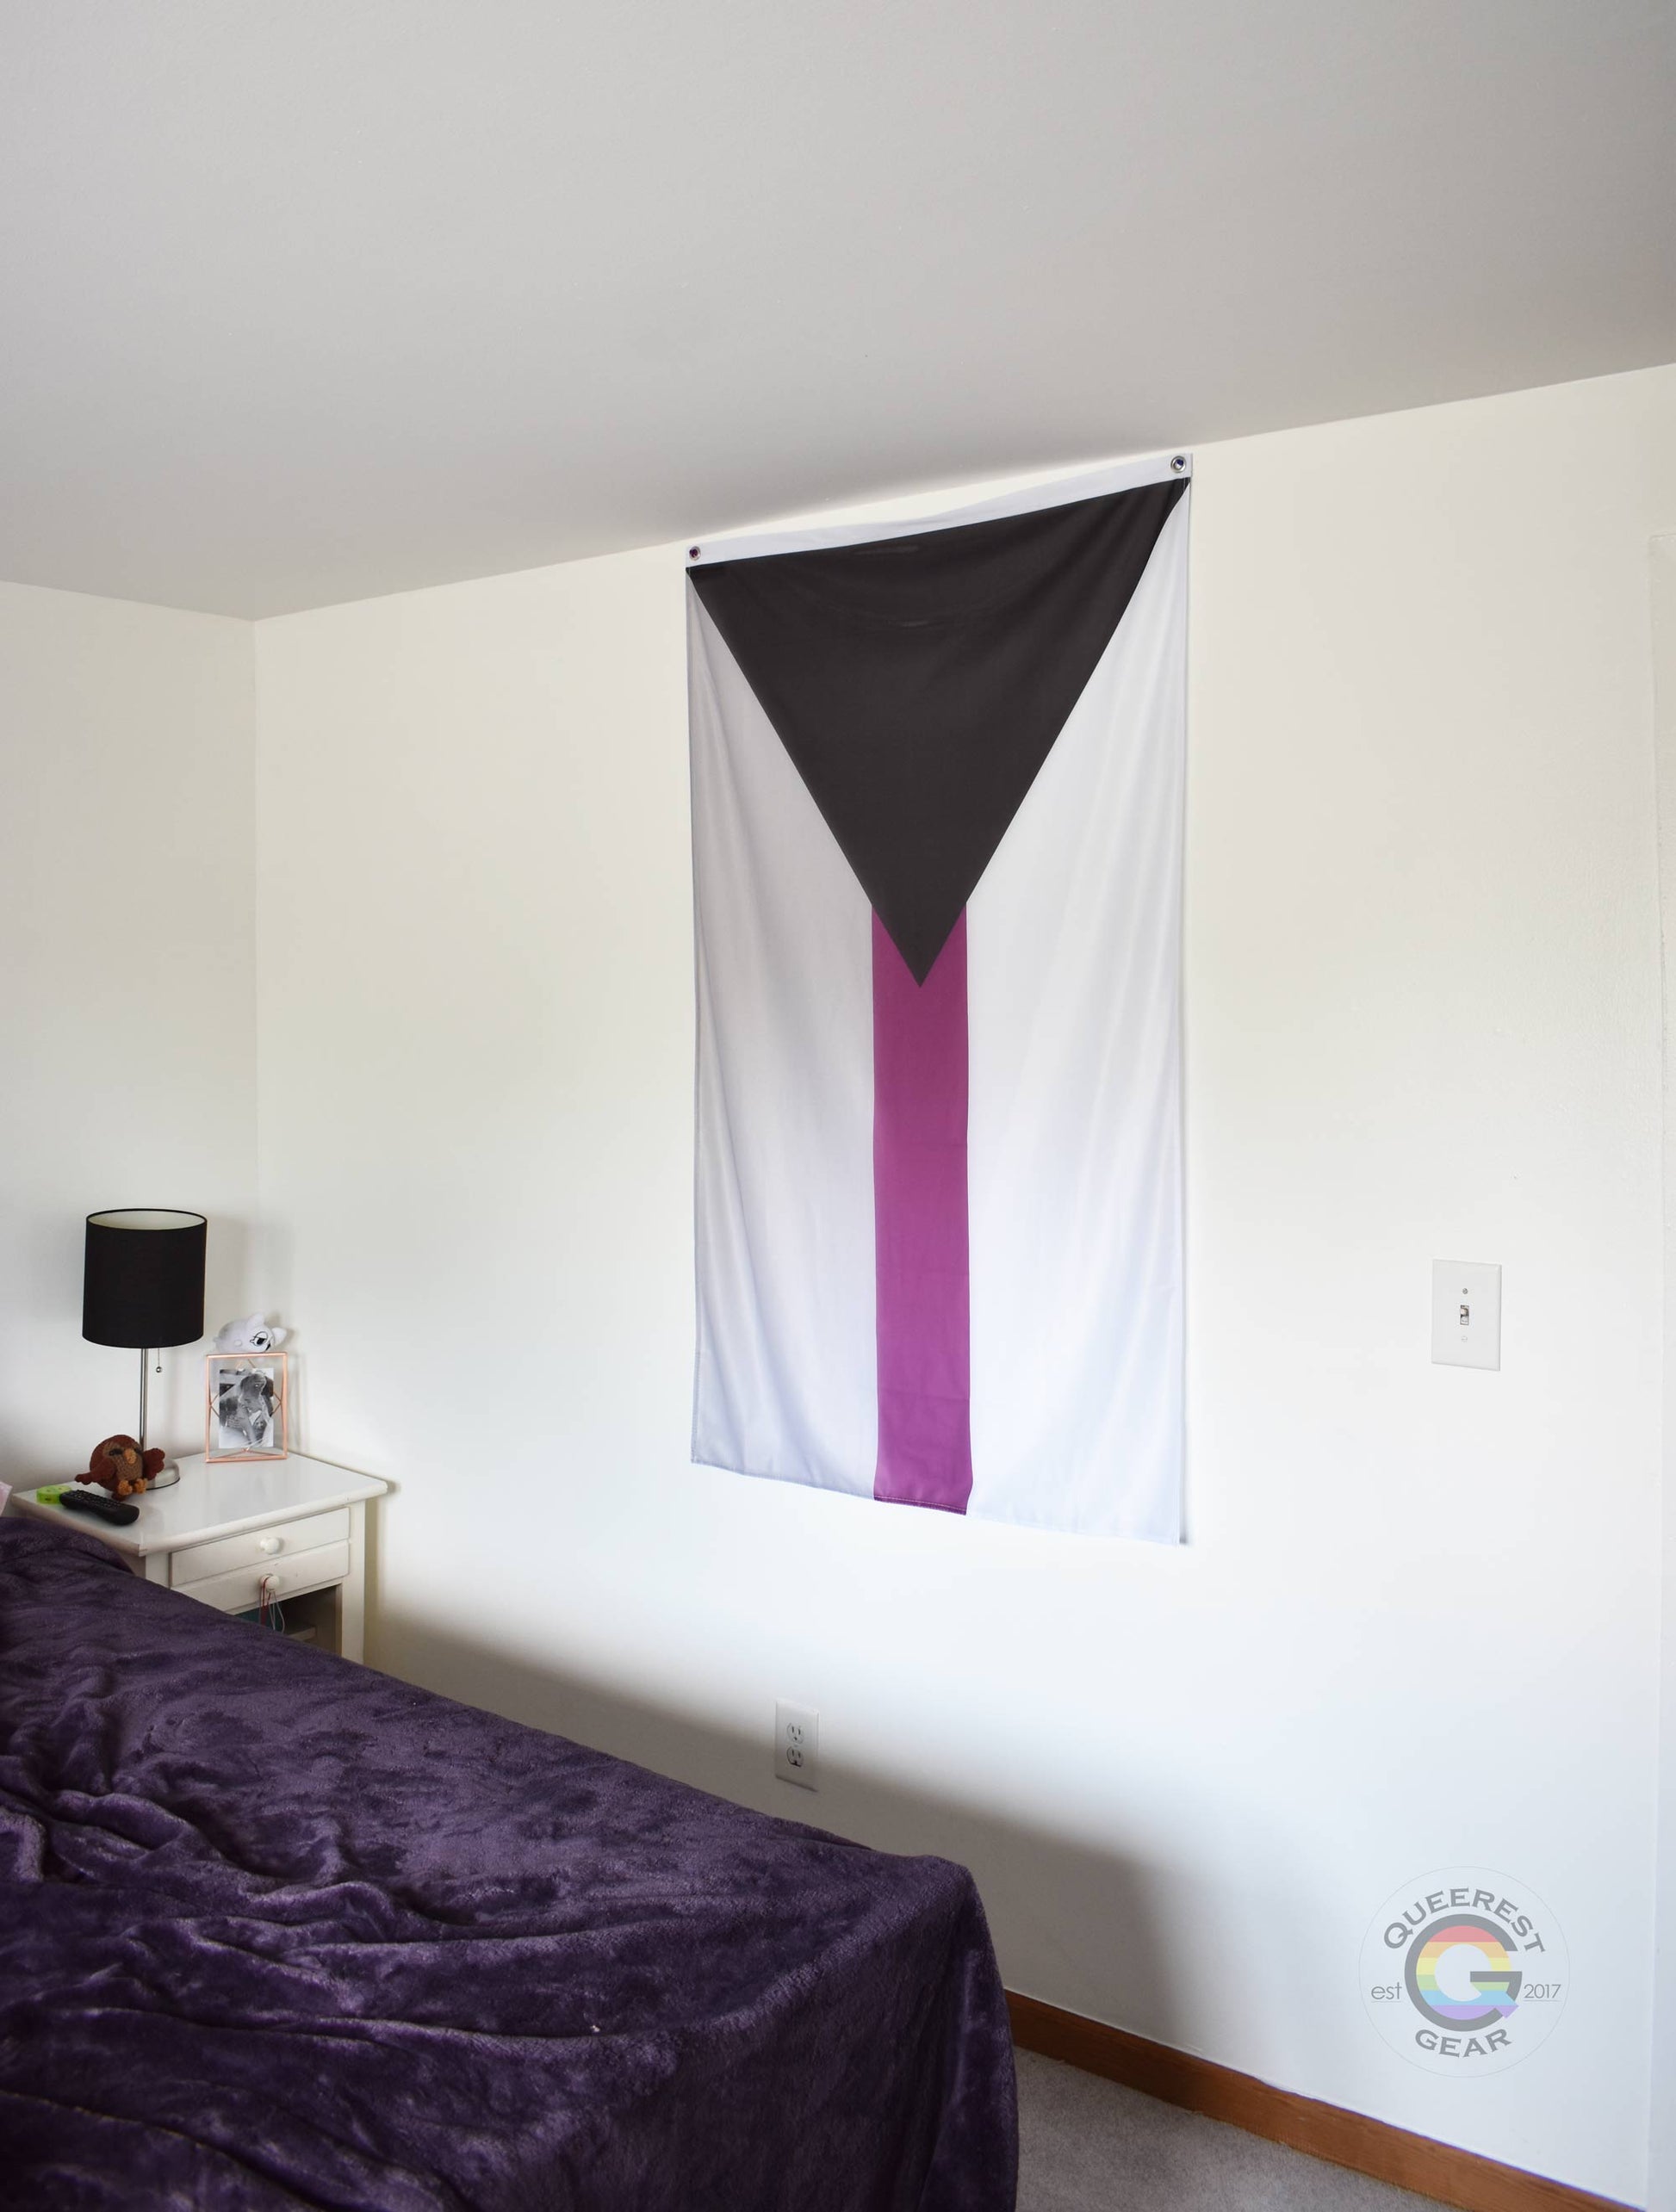  3’x5’ demisexual pride flag hanging vertically on the wall of a bedroom with a nightstand and a bed